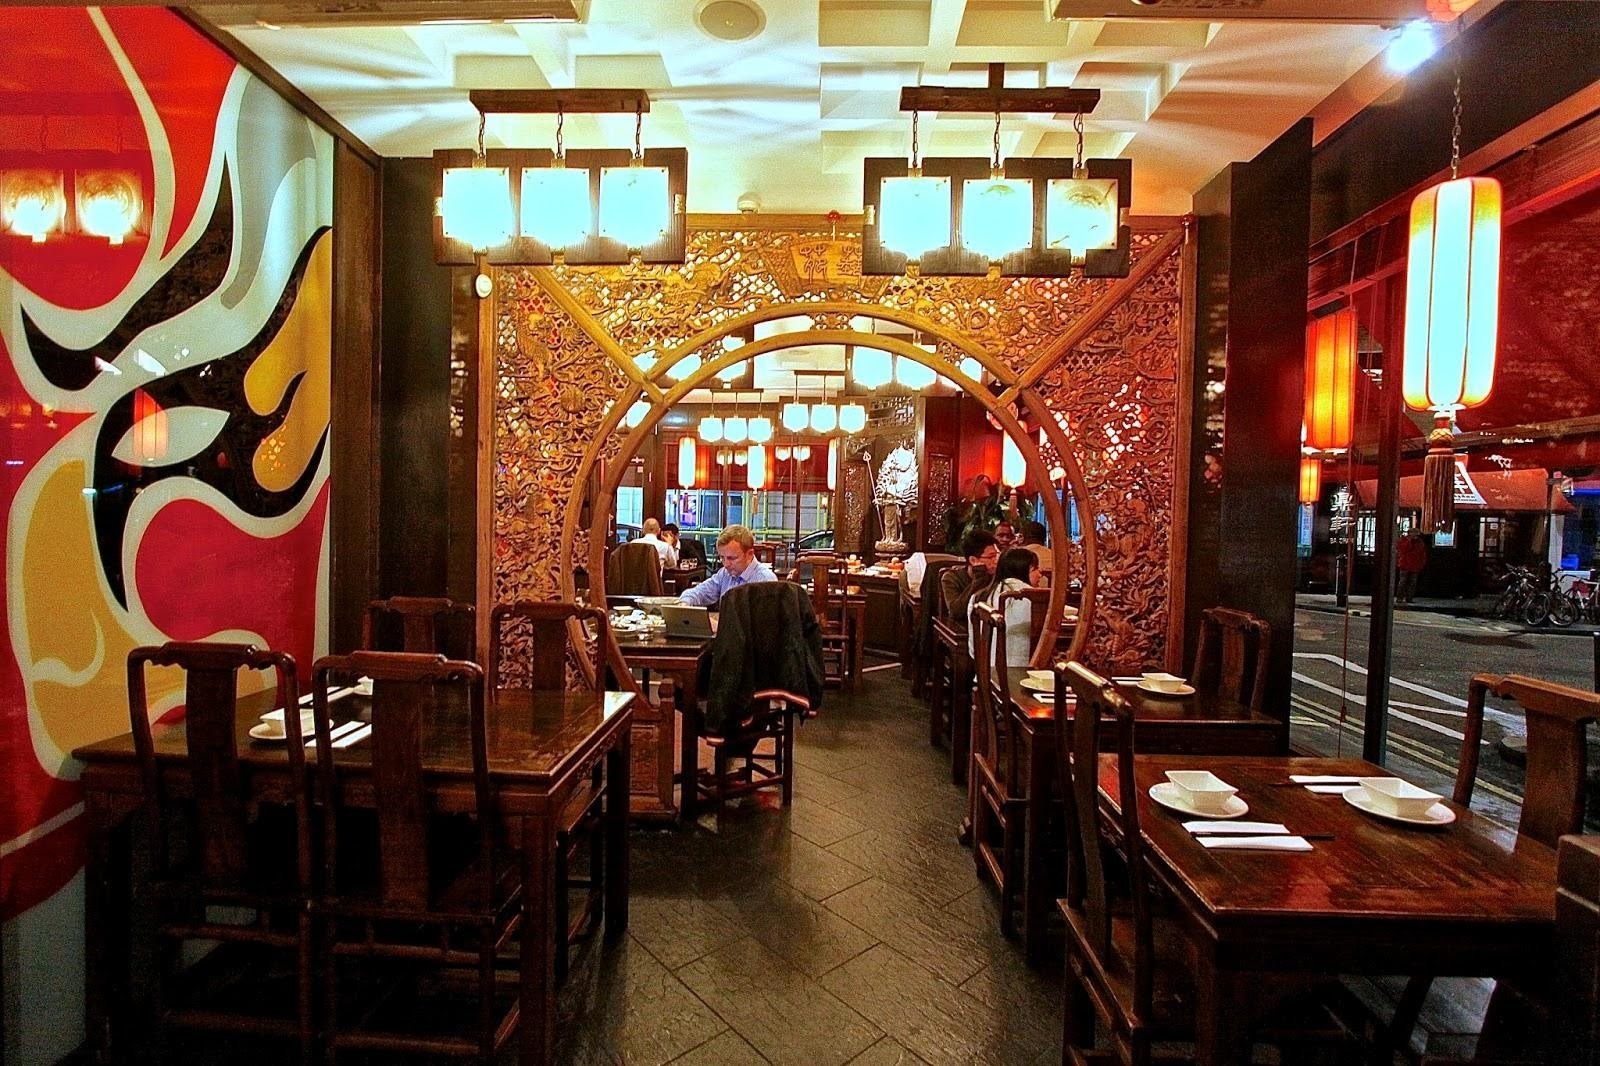 The London Foodie: Bar Shu - The Heat is On!